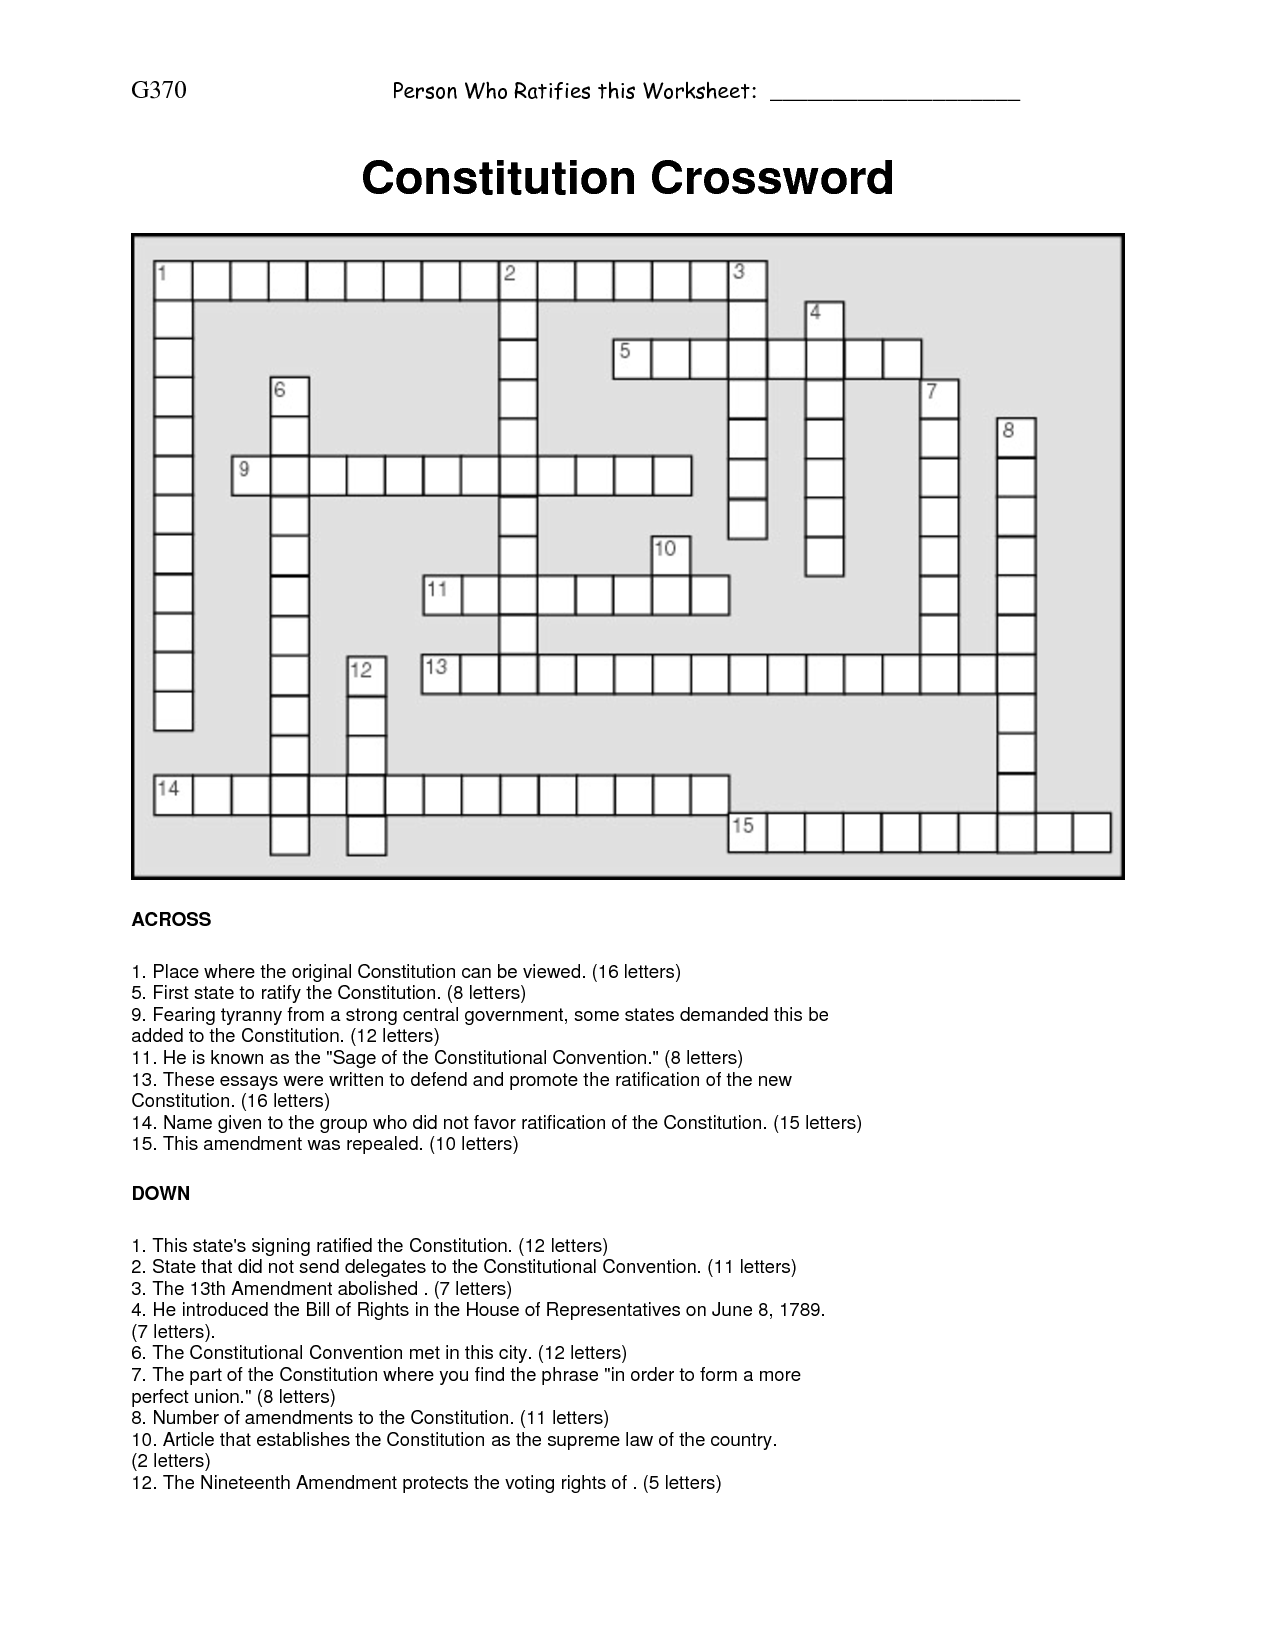 Constitution Crossword Puzzle Answers Image